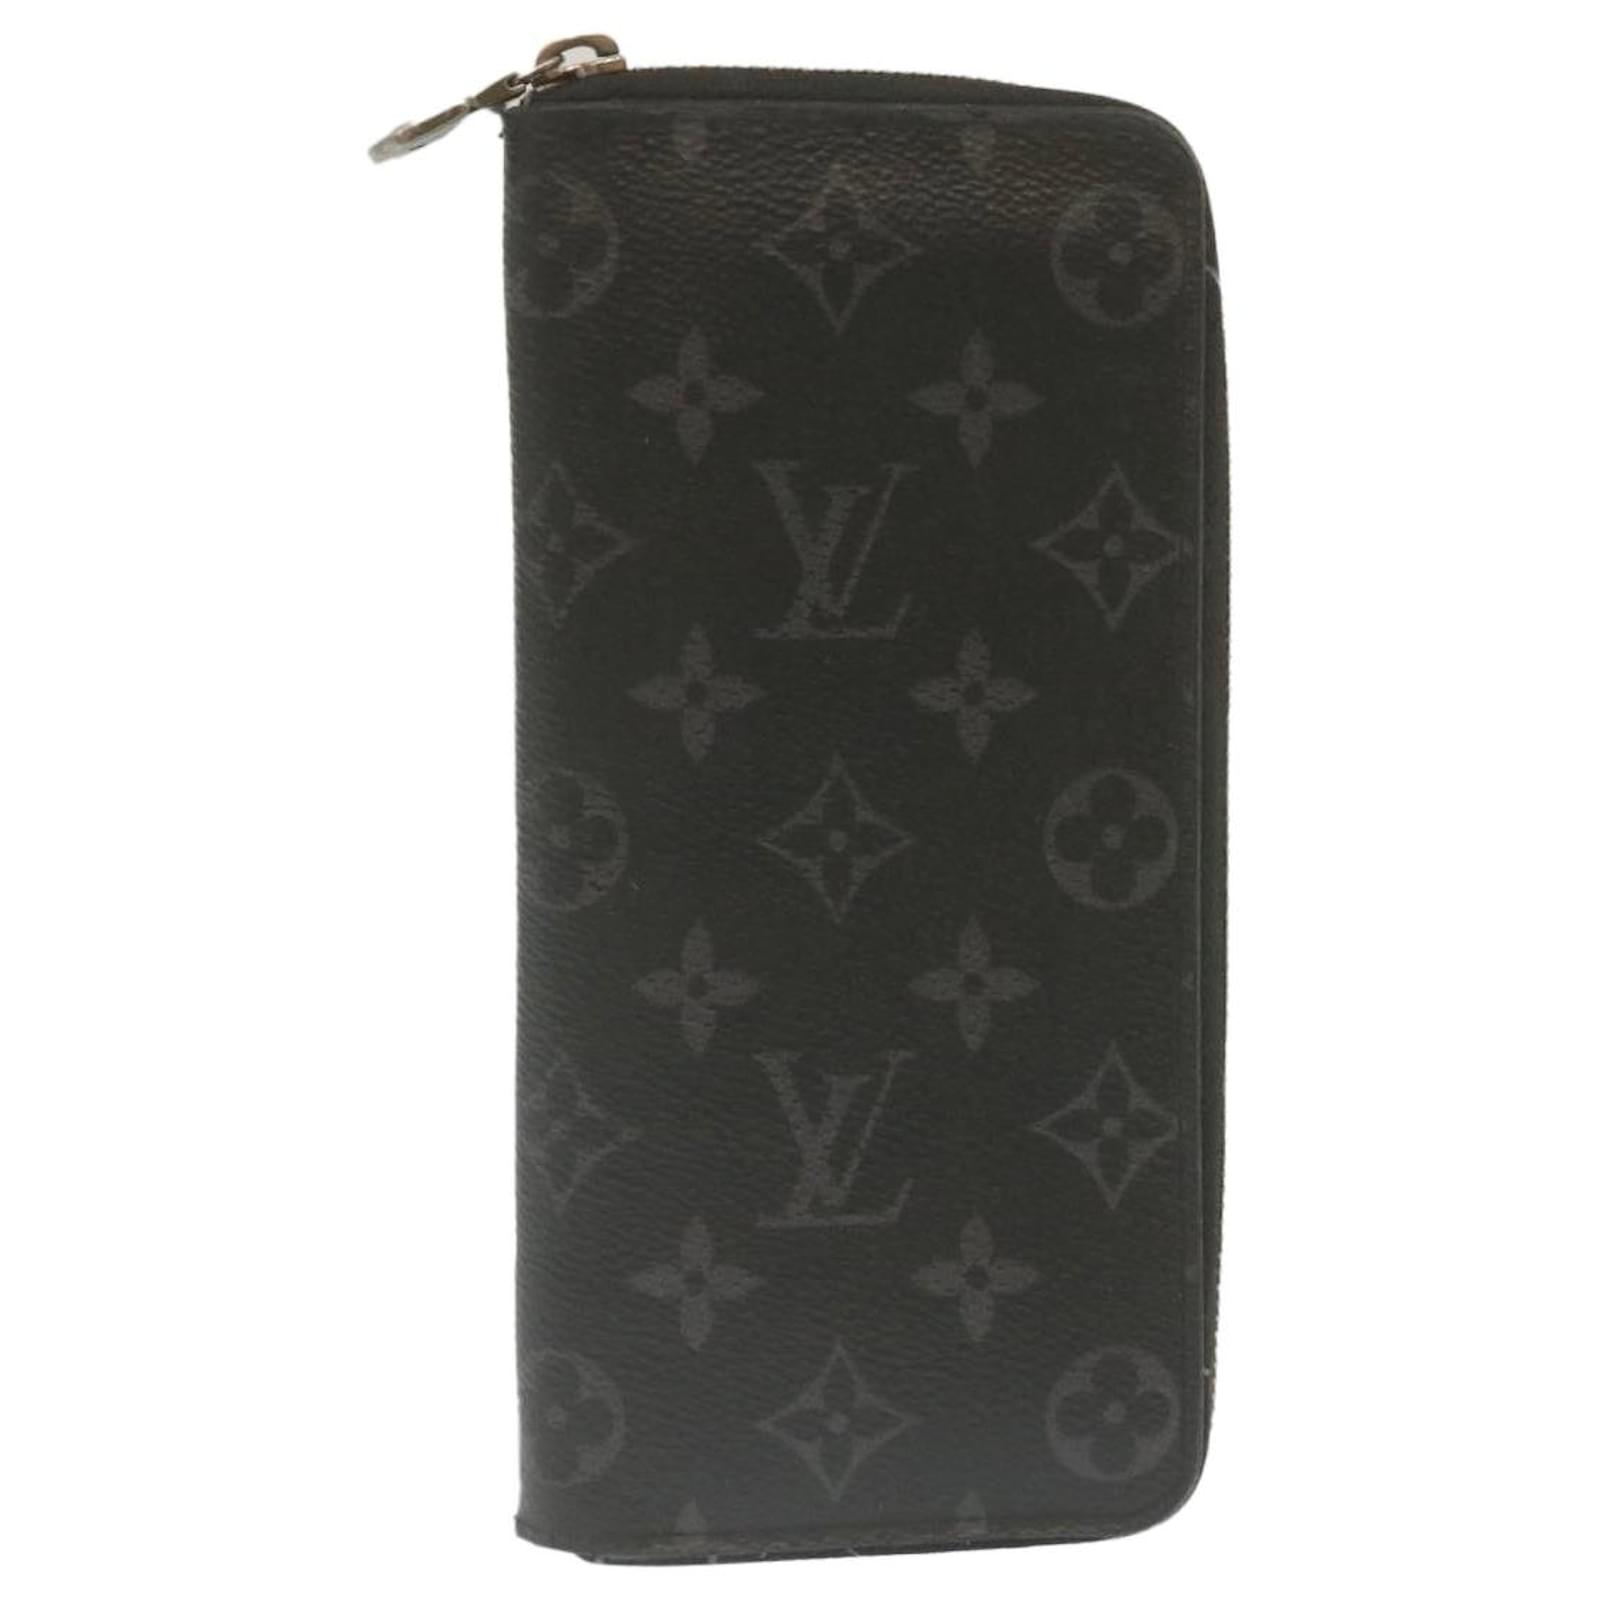 LOUIS VUITTON M62295 Long wallet (with coin pocket) Zippy Wallet